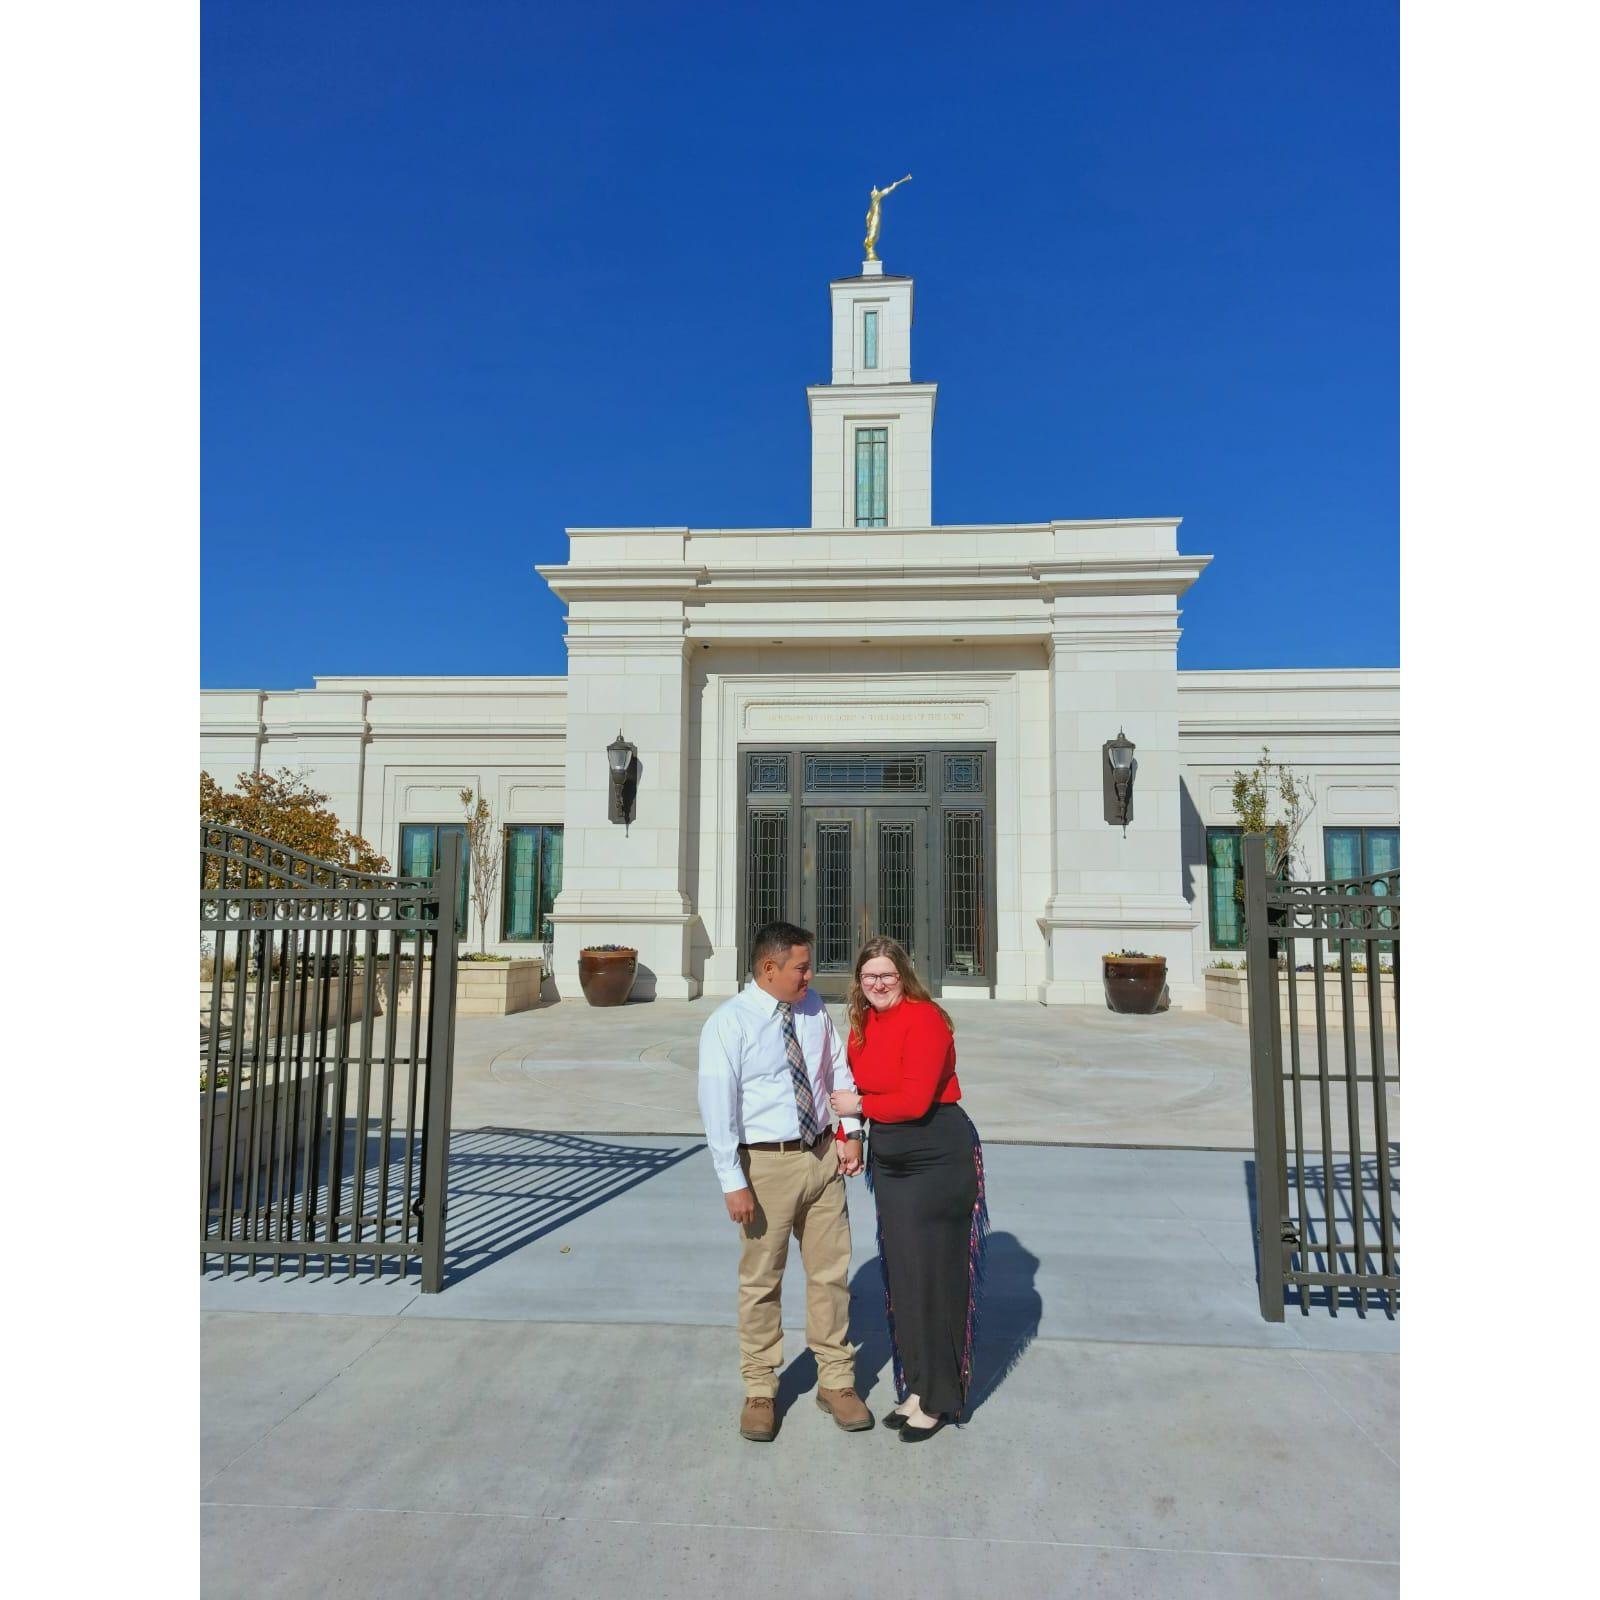 Our first trip to the temple together.